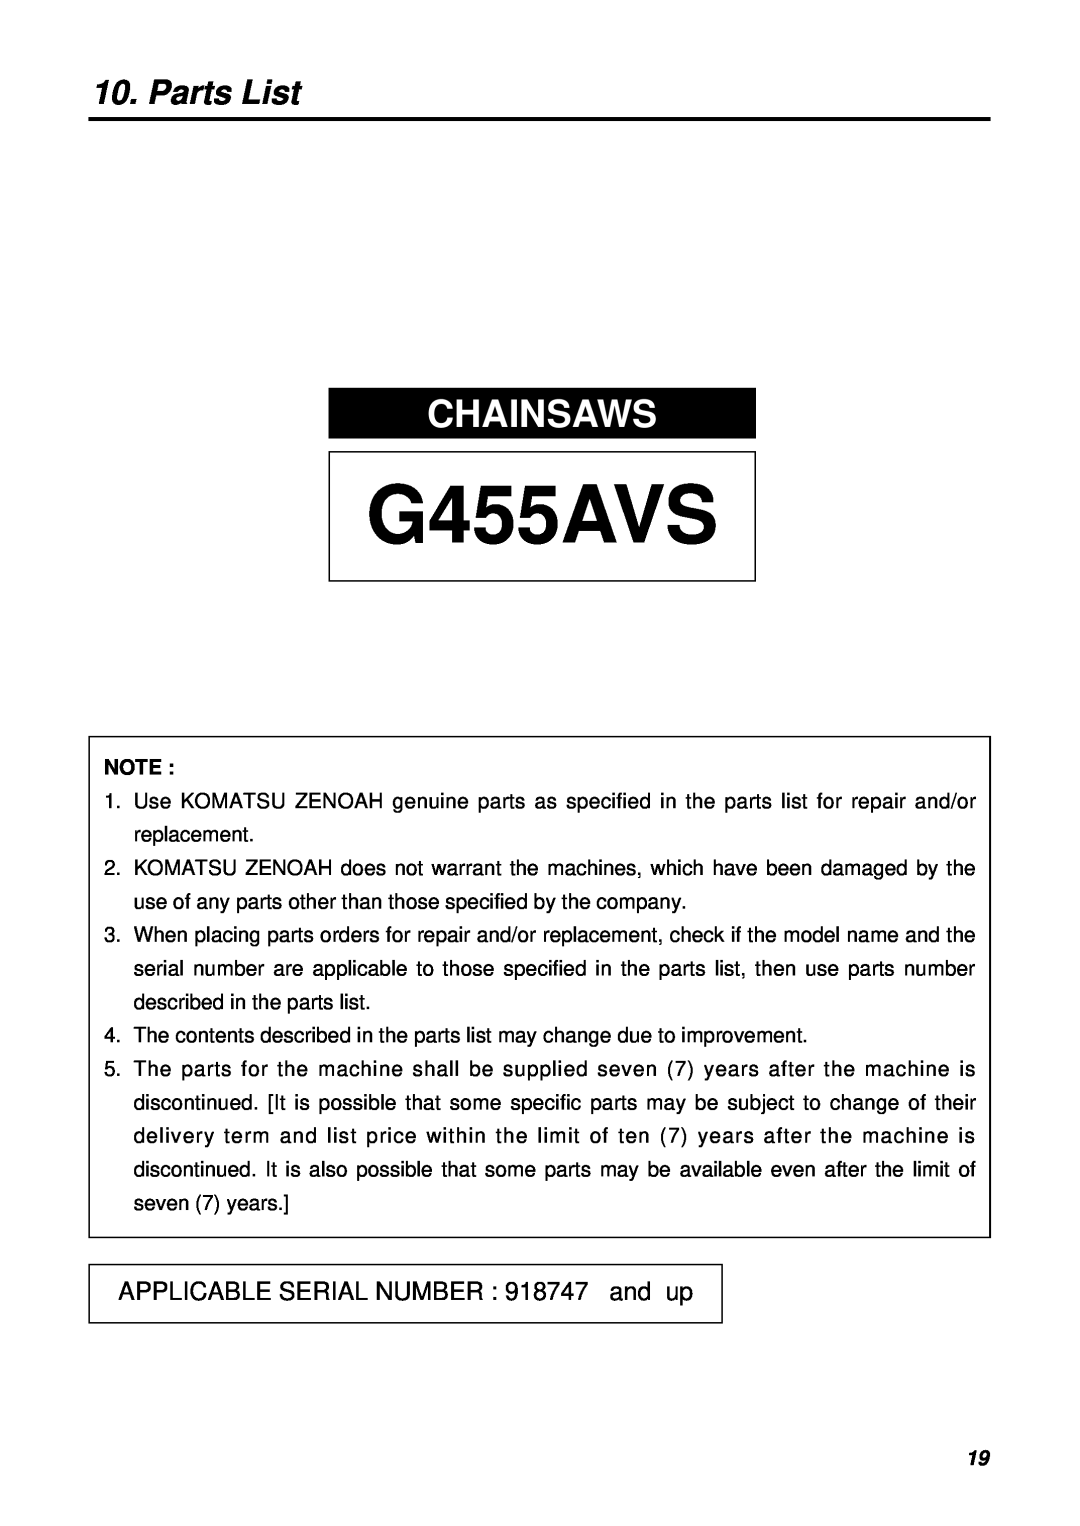 Zenoah G455AVS manual Parts List, Chainsaws, APPLICABLE SERIAL NUMBER 918747 and up 